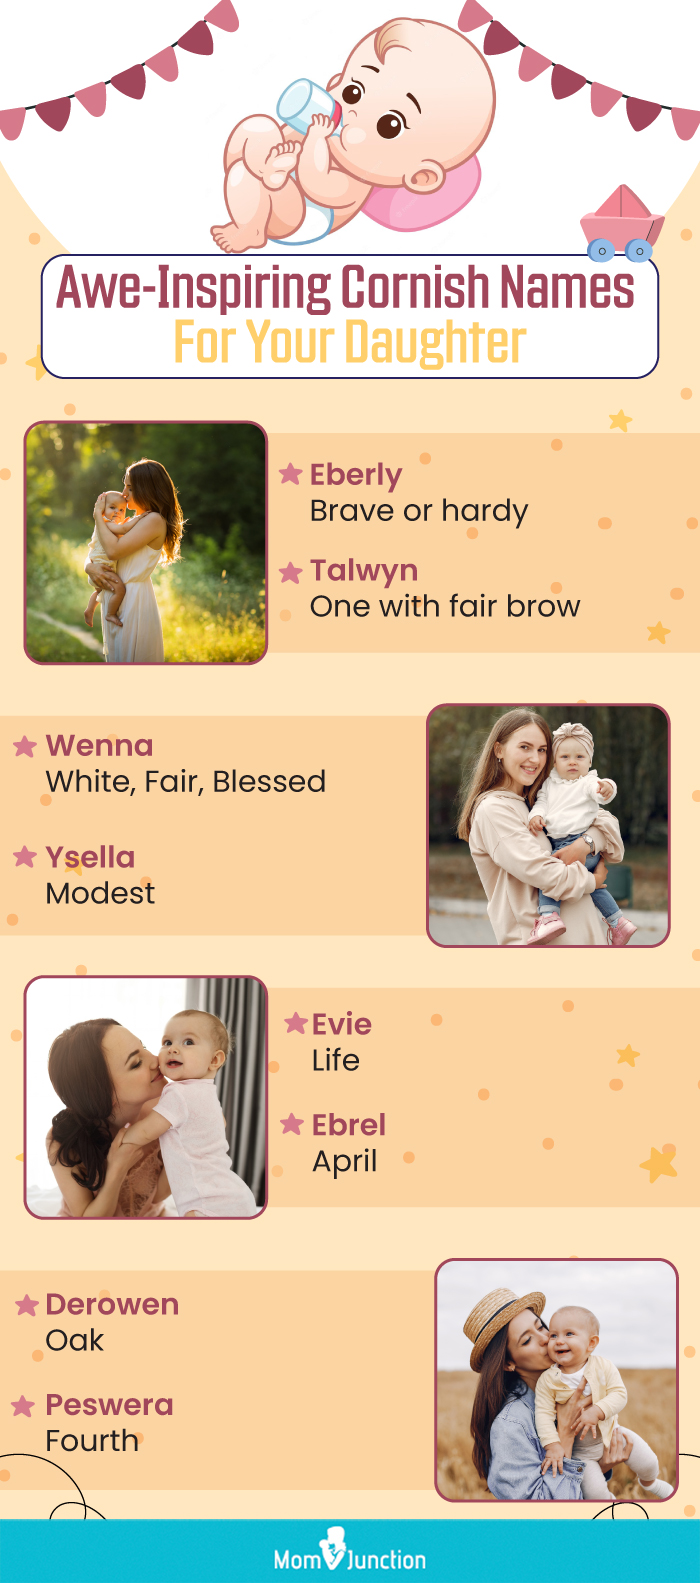 awe inspiring cornish names for your daughter (infographic)